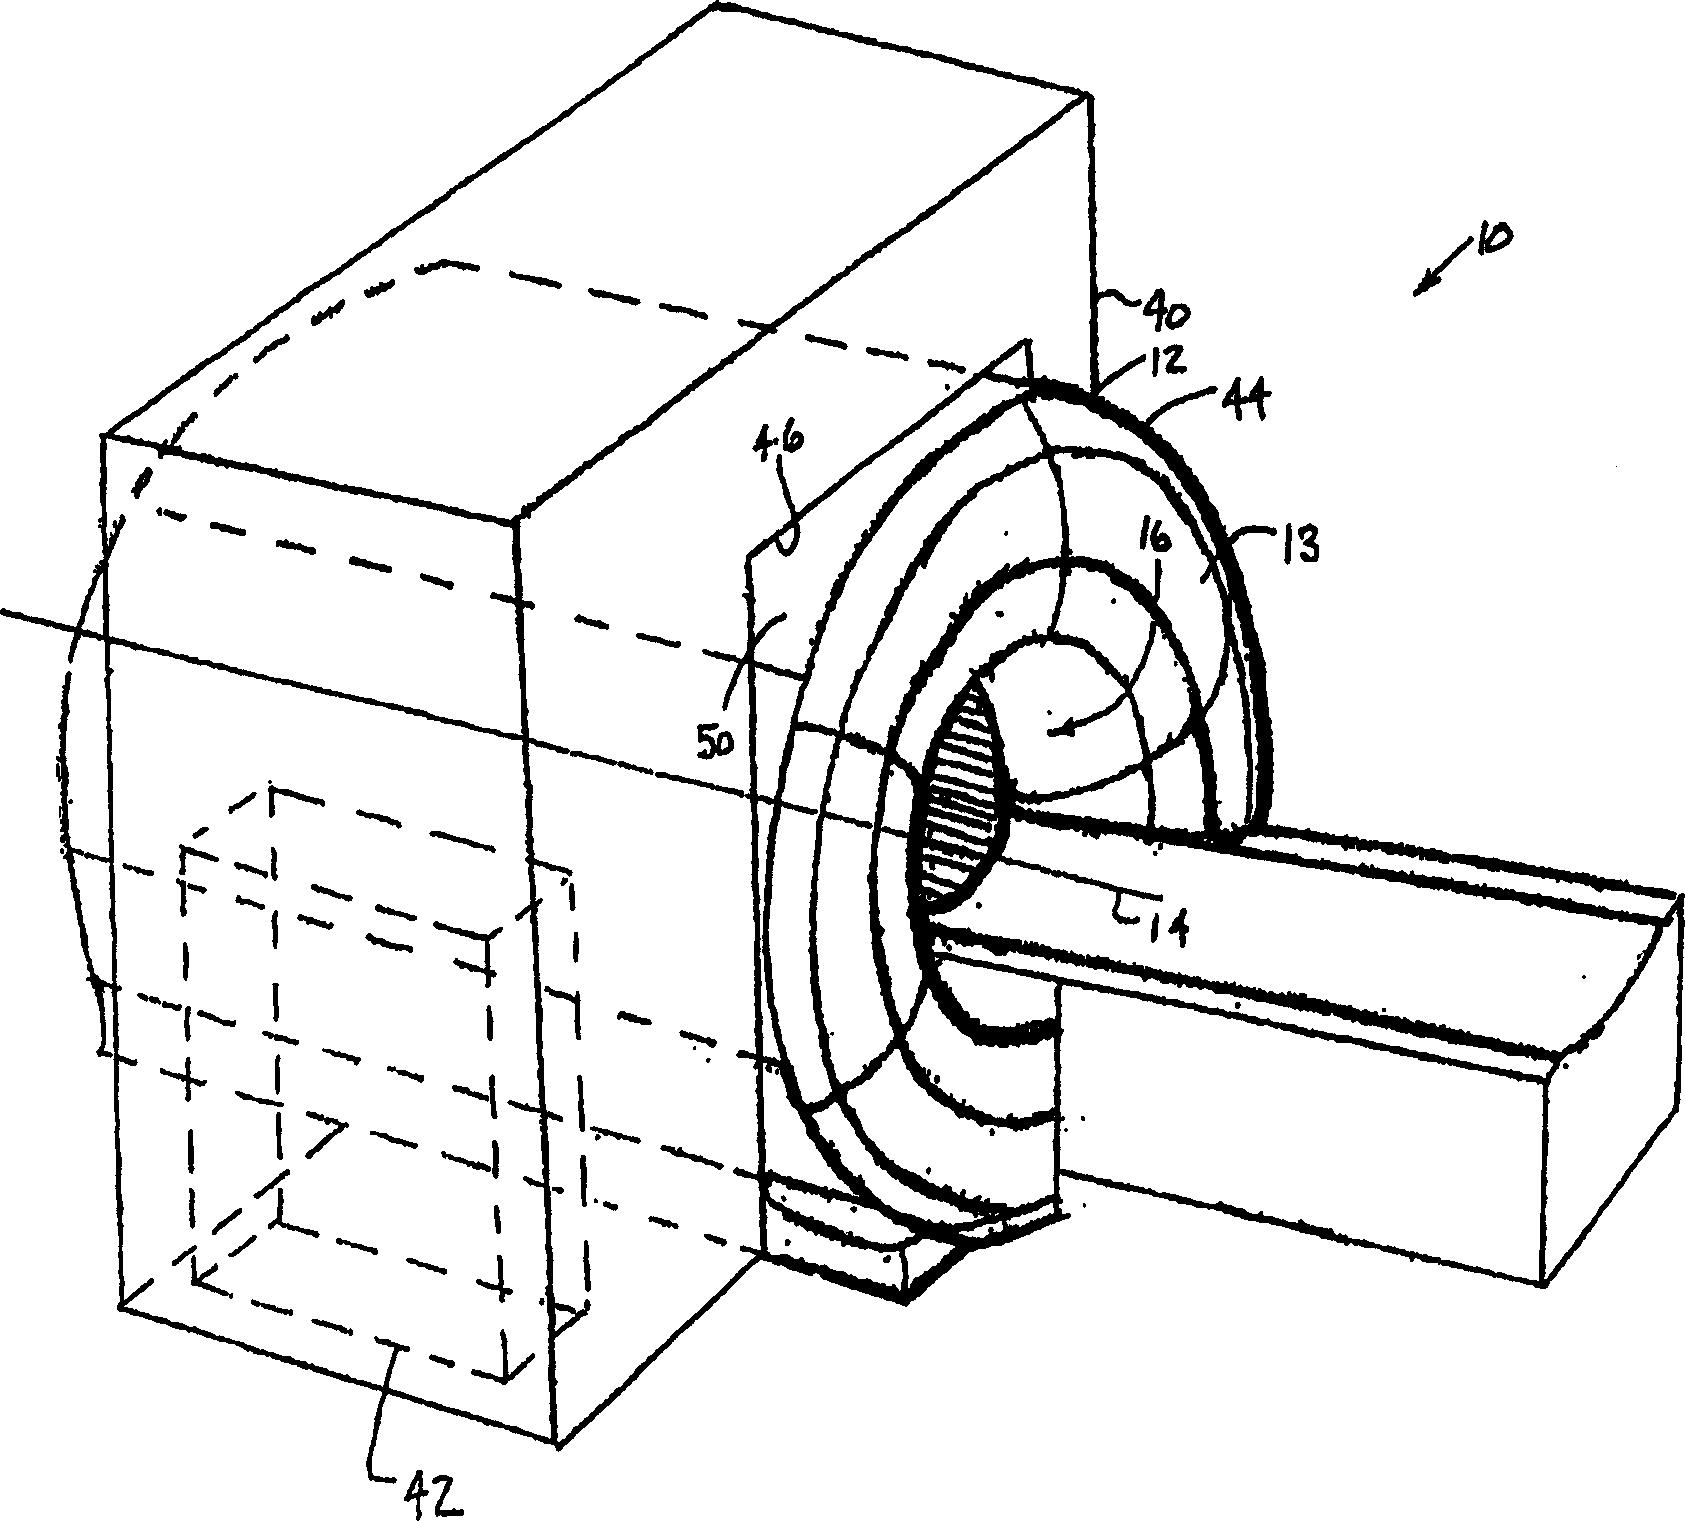 Integrated electronic RF shielding apparatus for an MRI magnet